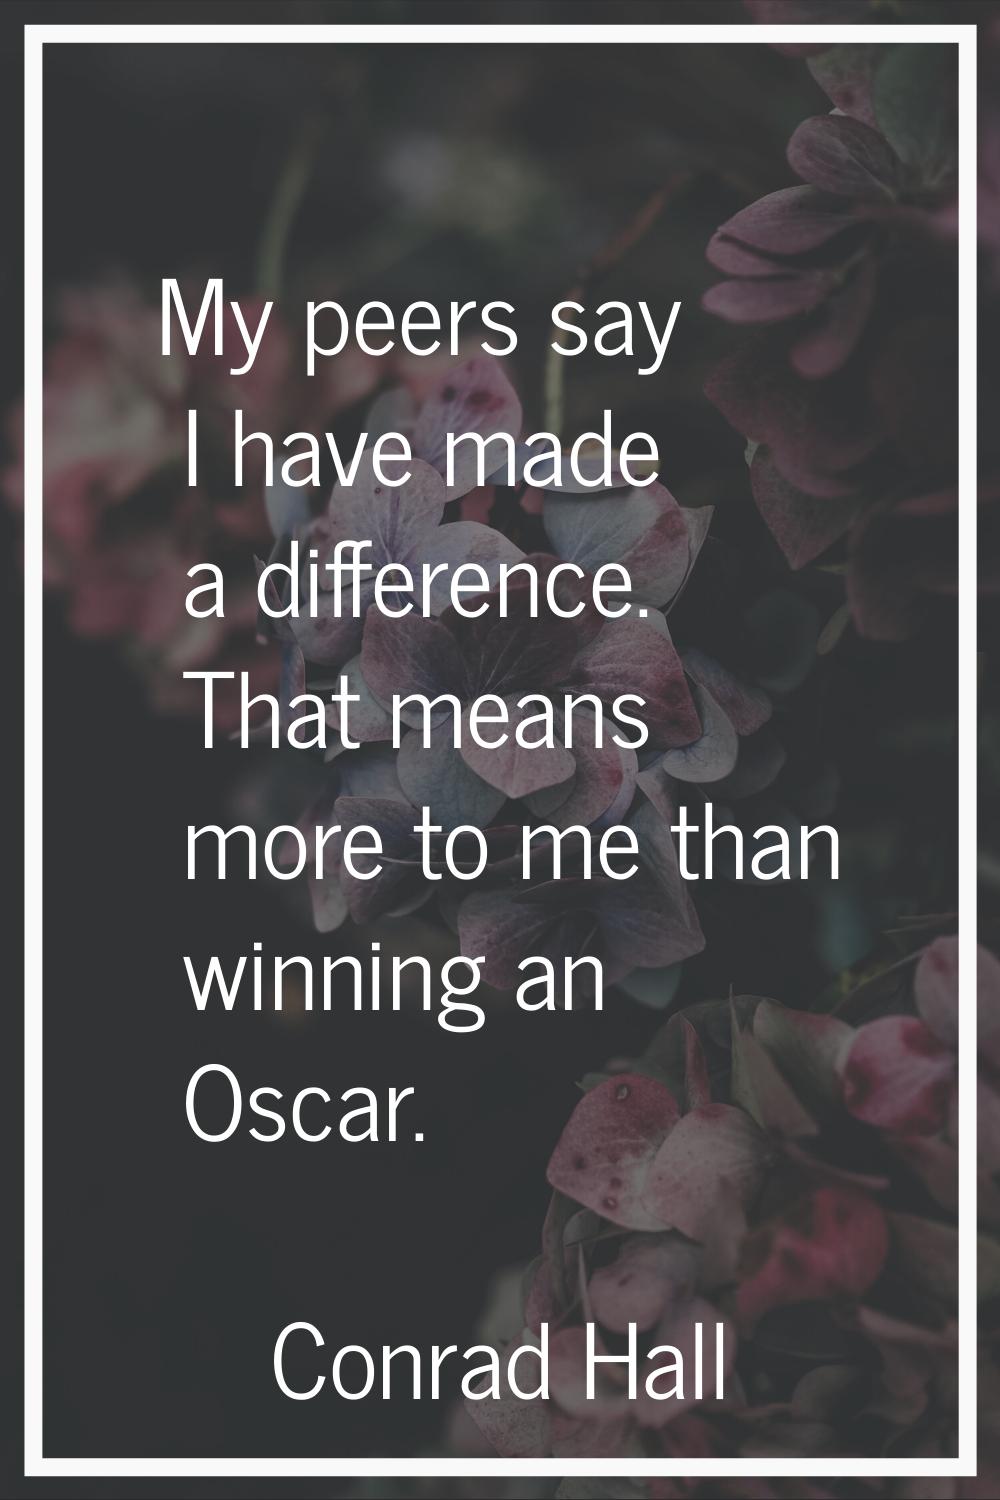 My peers say I have made a difference. That means more to me than winning an Oscar.